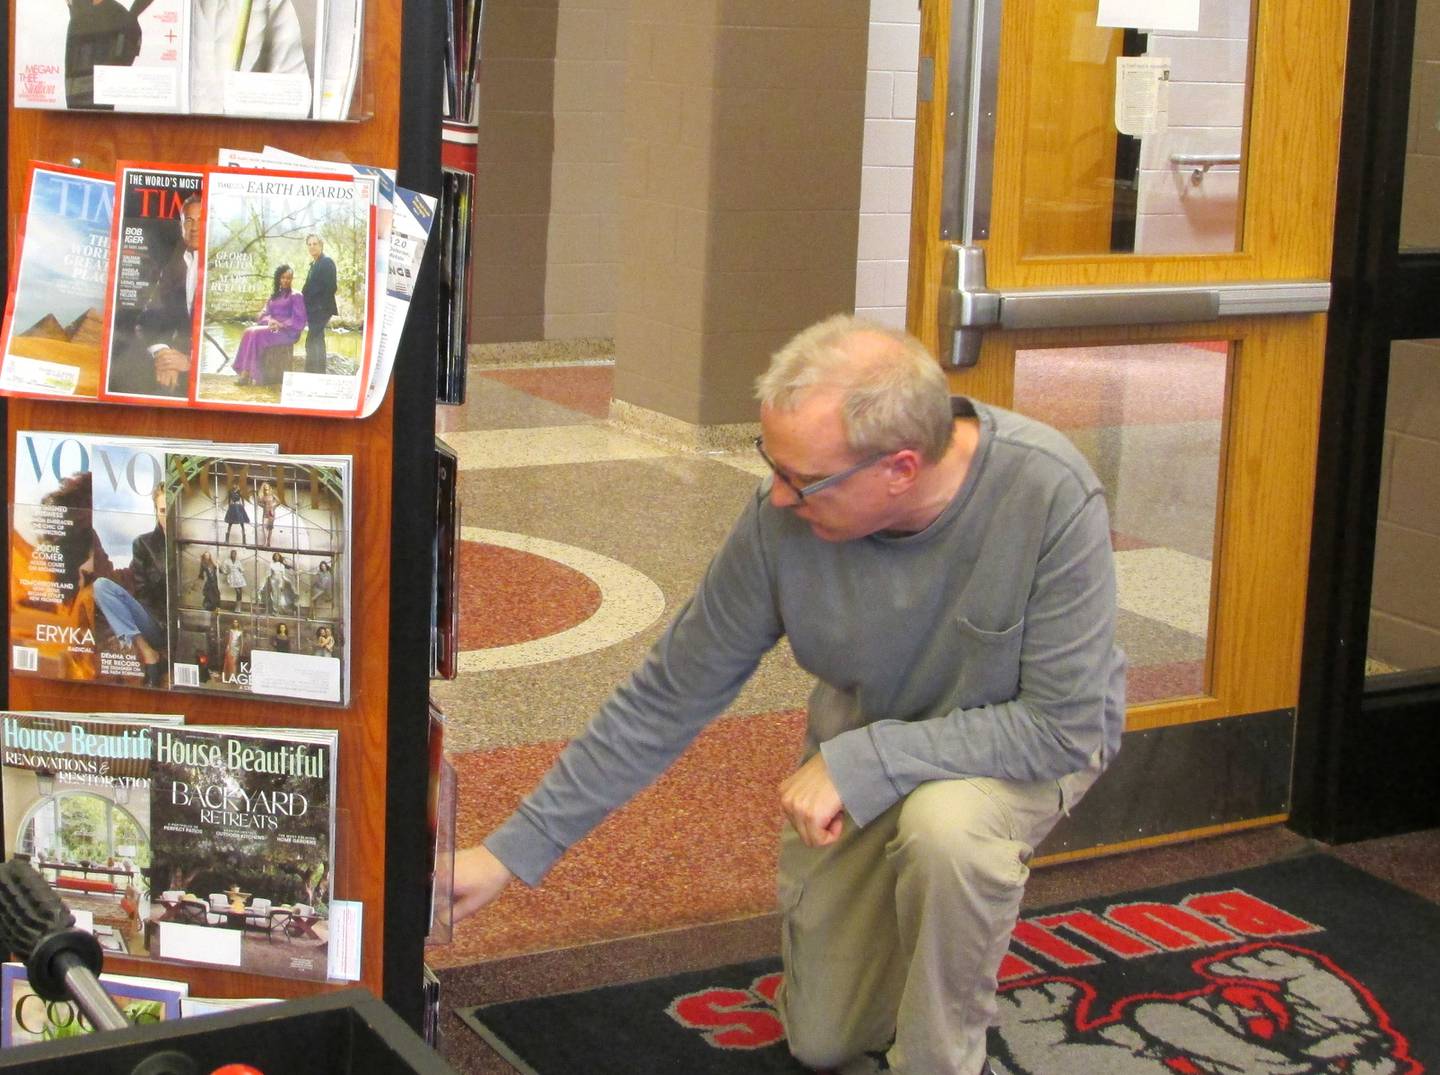 Streator High School English teacher and library media coordinator Chris Aubry searches for comic books to share with students who attended Hub Club.